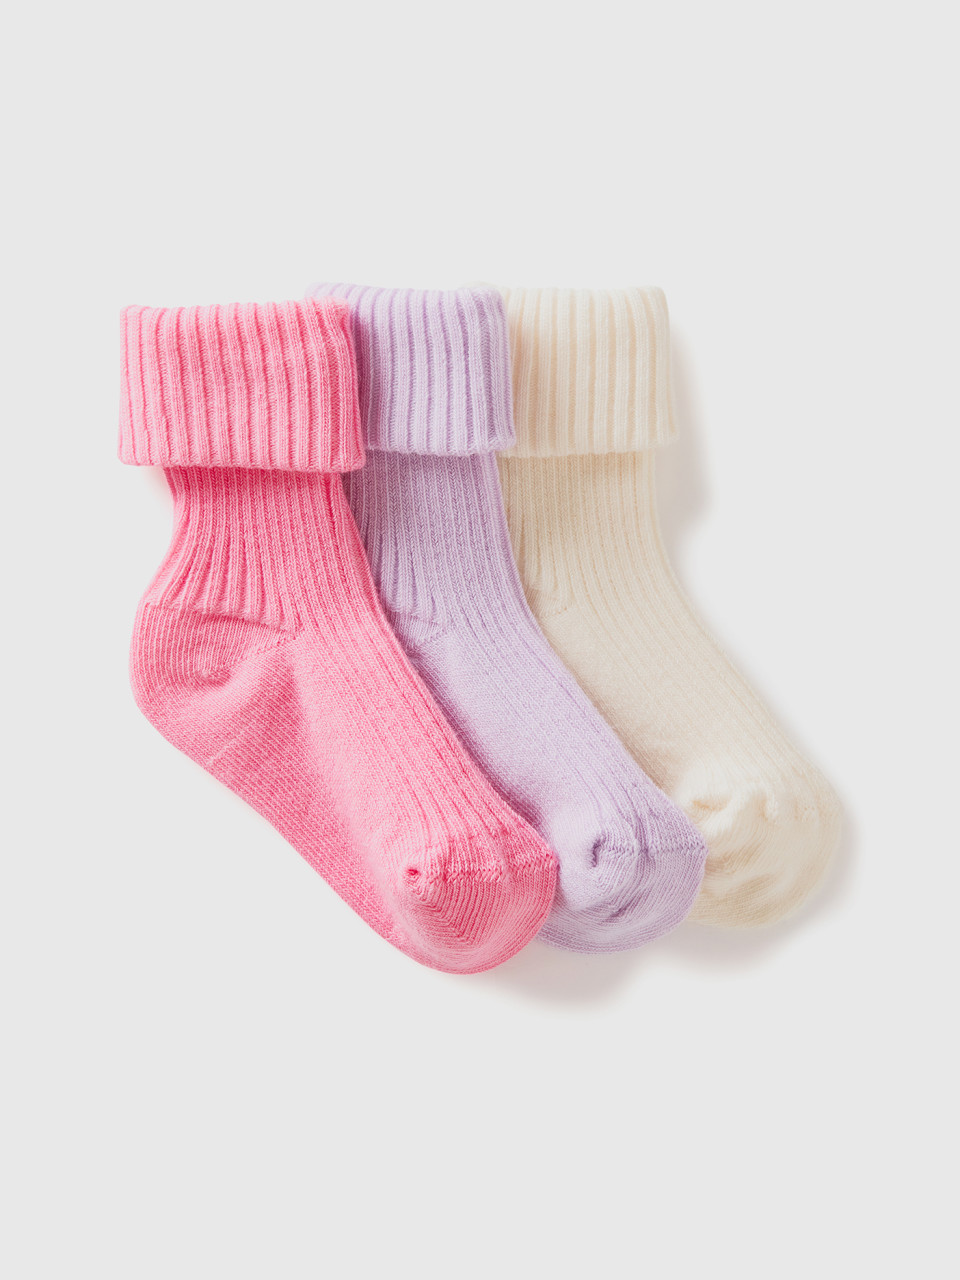 Benetton, Long Sock Set With Cuff, Multi-color, Kids